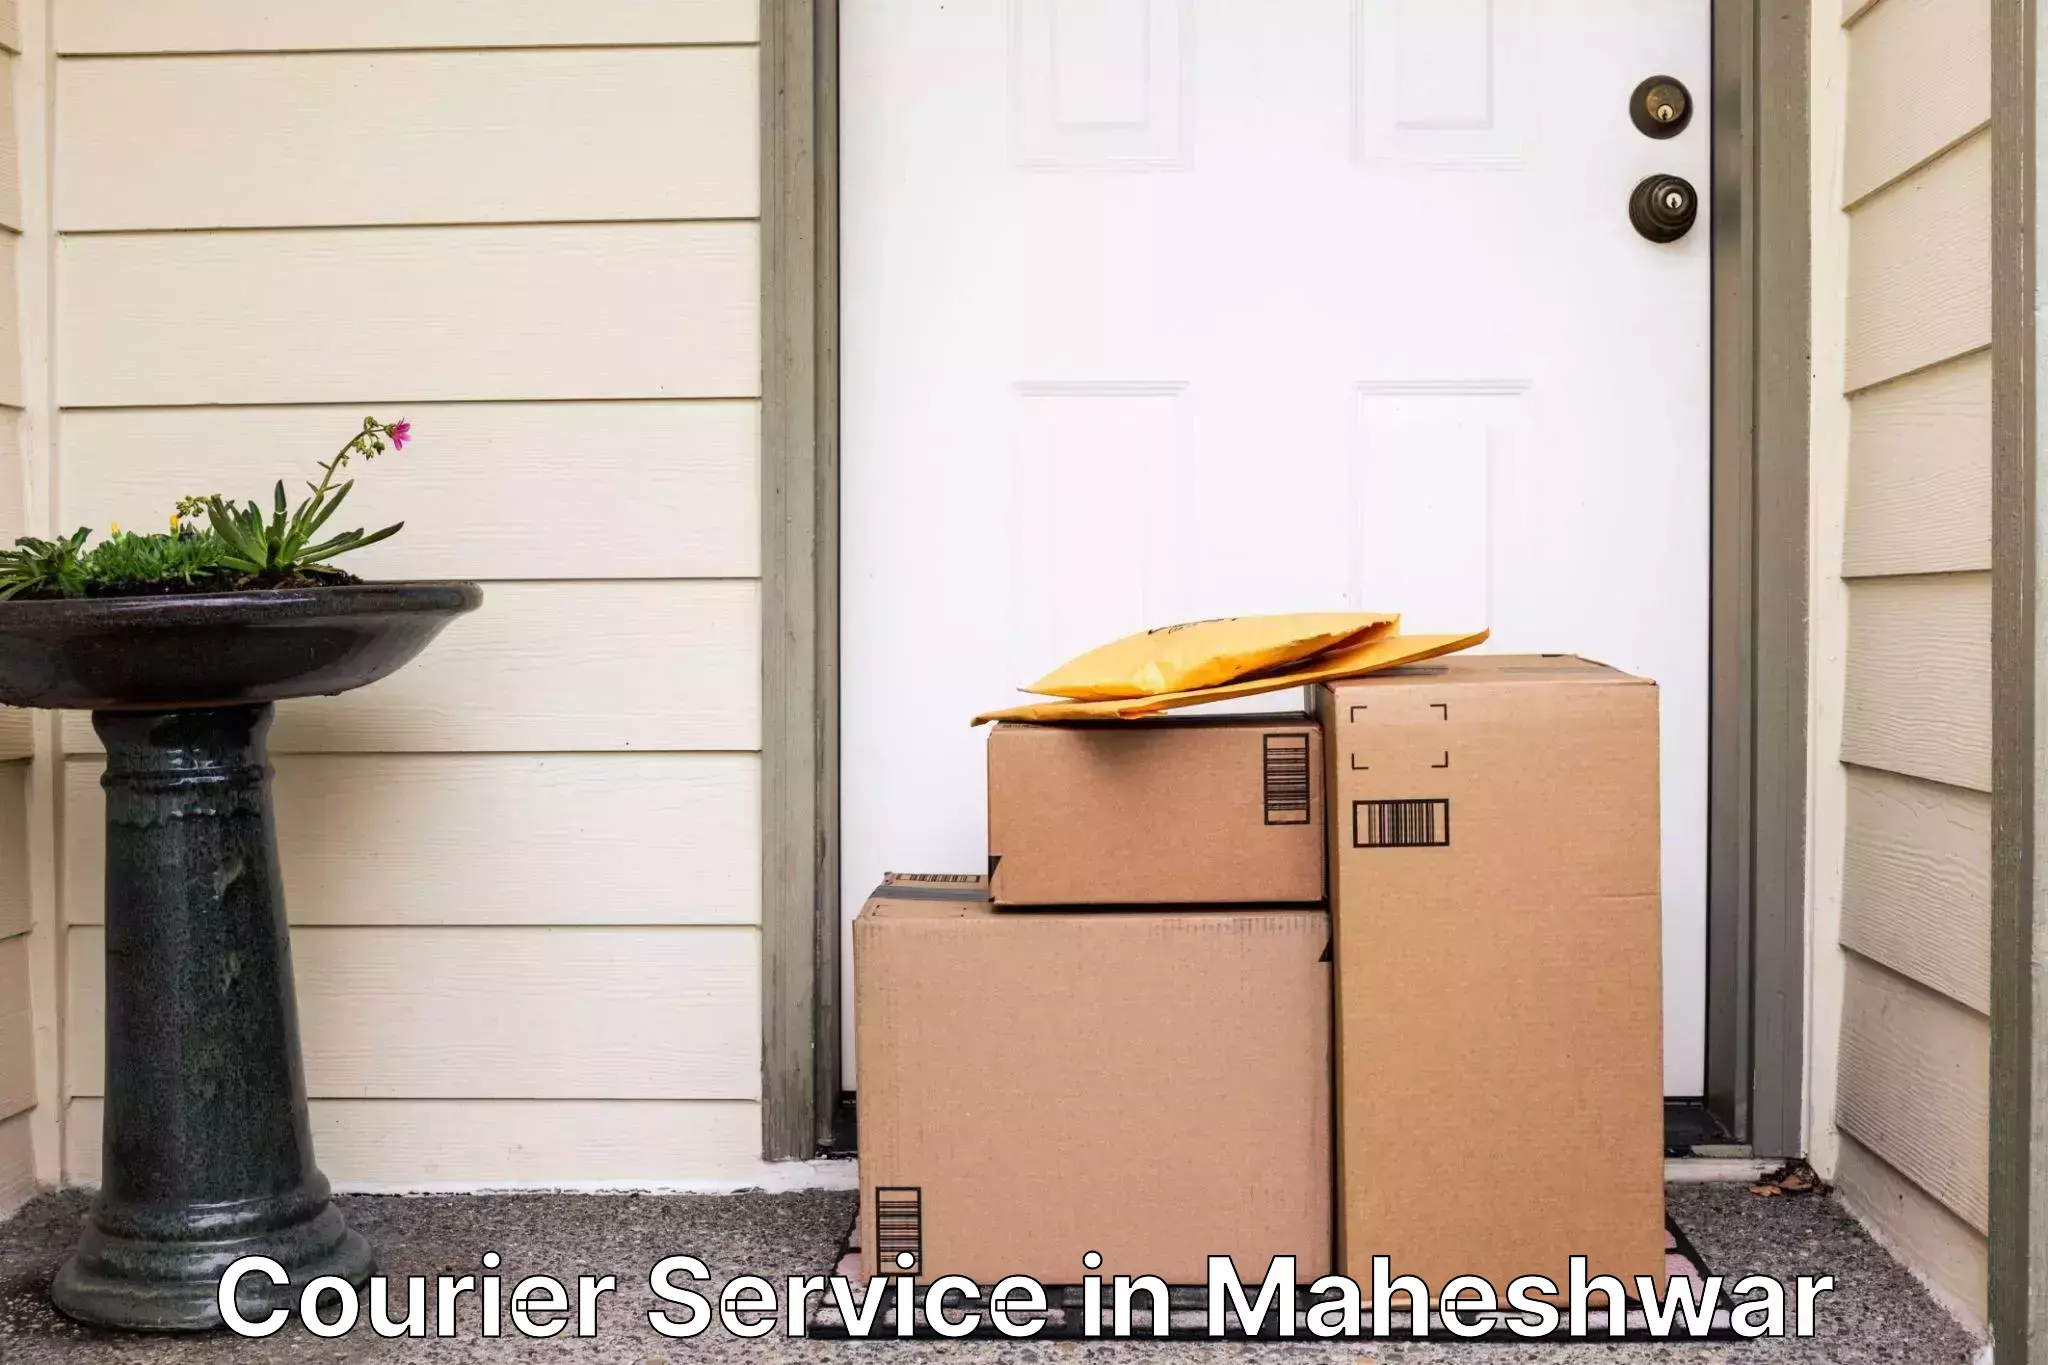 Courier rate comparison in Maheshwar